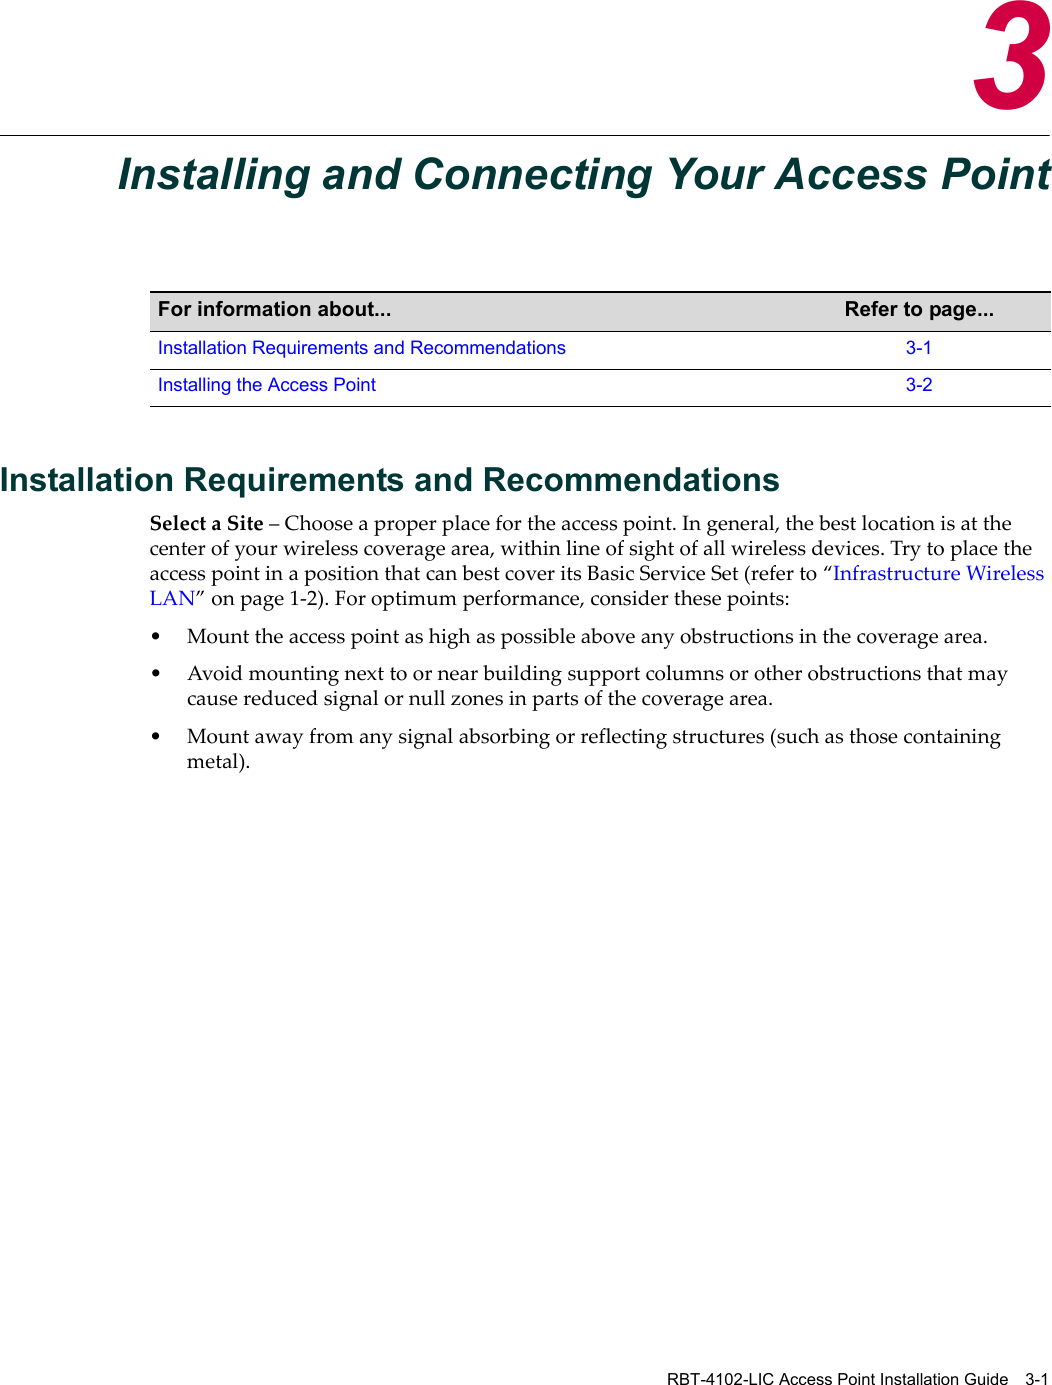 RBT-4102-LIC Access Point Installation Guide 3-13Installing and Connecting Your Access PointInstallation Requirements and RecommendationsSelectaSite–Chooseaproperplacefortheaccesspoint.Ingeneral,thebestlocationisatthecenterofyourwirelesscoveragearea,withinlineofsightofallwirelessdevices.TrytoplacetheaccesspointinapositionthatcanbestcoveritsBasicServiceSet(referto“InfrastructureWirelessLAN”onpage 1‐2).Foroptimumperformance,considerthesepoints:• Mounttheaccesspointashighaspossibleaboveanyobstructionsinthecoveragearea.•Avoidmountingnexttoornearbuildingsupportcolumnsorotherobstructionsthatmaycausereducedsignalornullzonesinpartsofthecoveragearea.• Mountawayfromanysignalabsorbingorreflectingstructures(suchasthosecontainingmetal).For information about... Refer to page...Installation Requirements and Recommendations 3-1Installing the Access Point 3-2